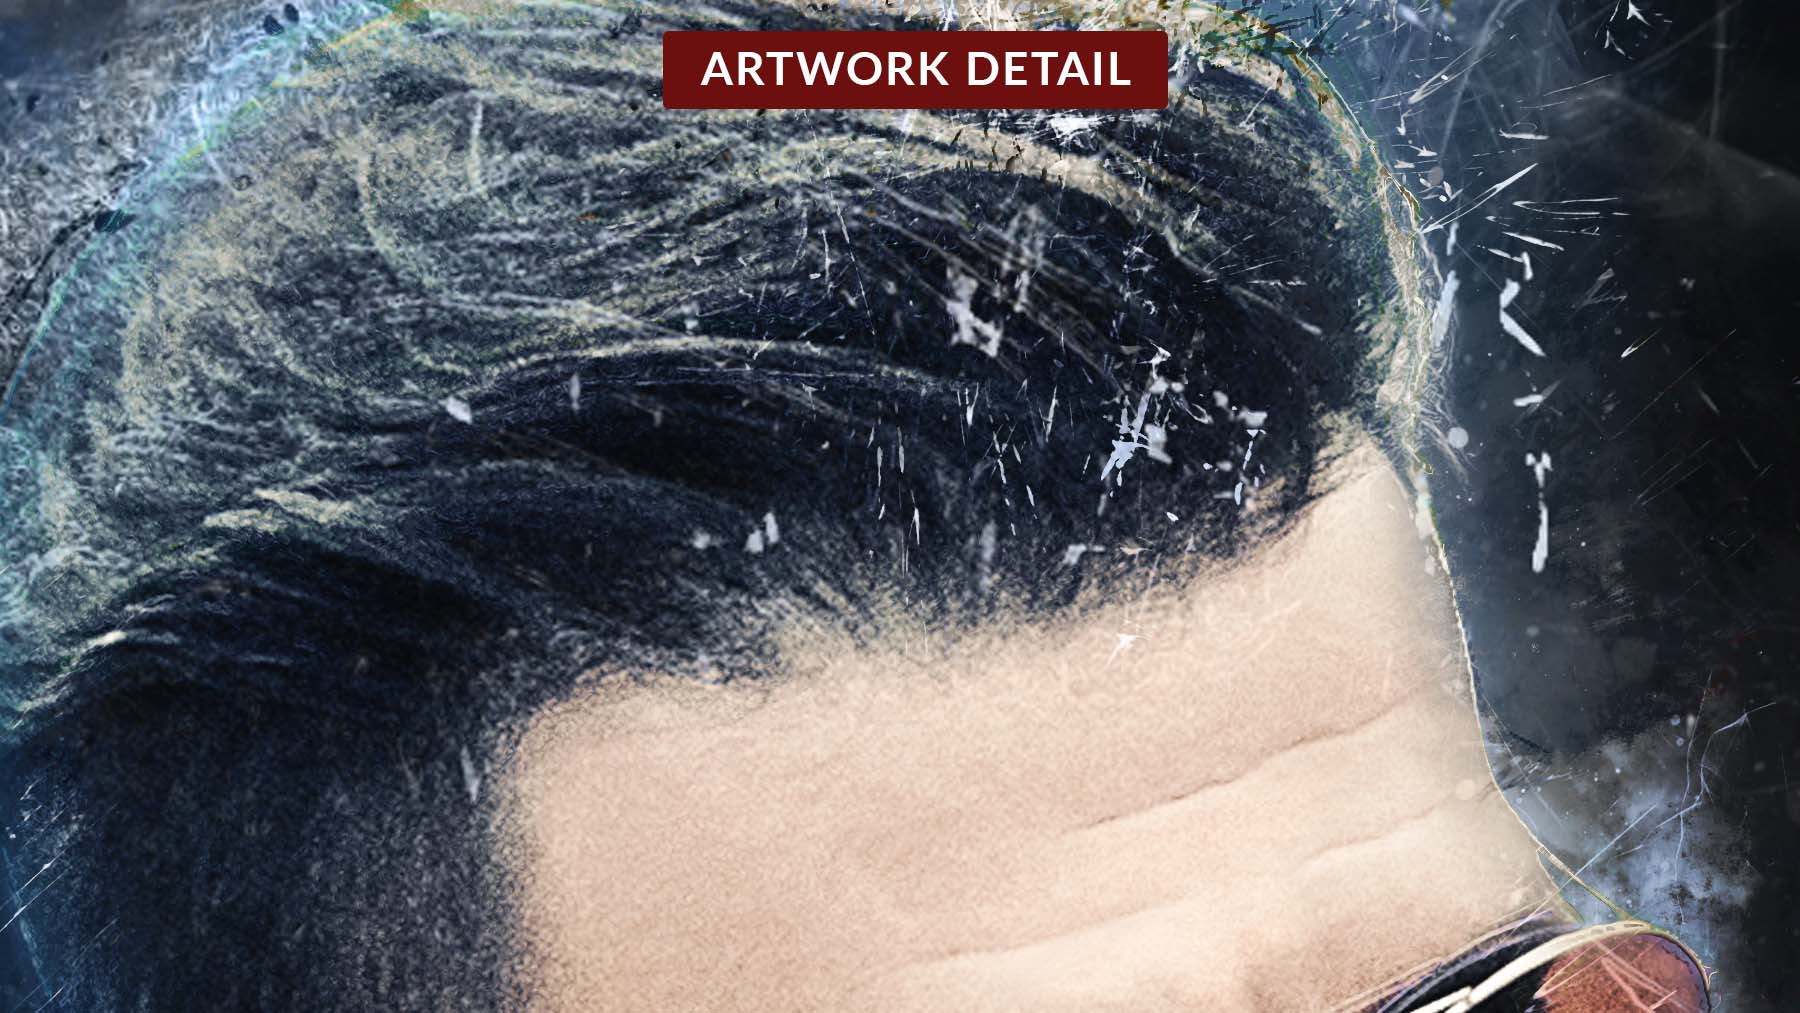 Detail of hair and effects from the Agent Jim NFT collectible artwork